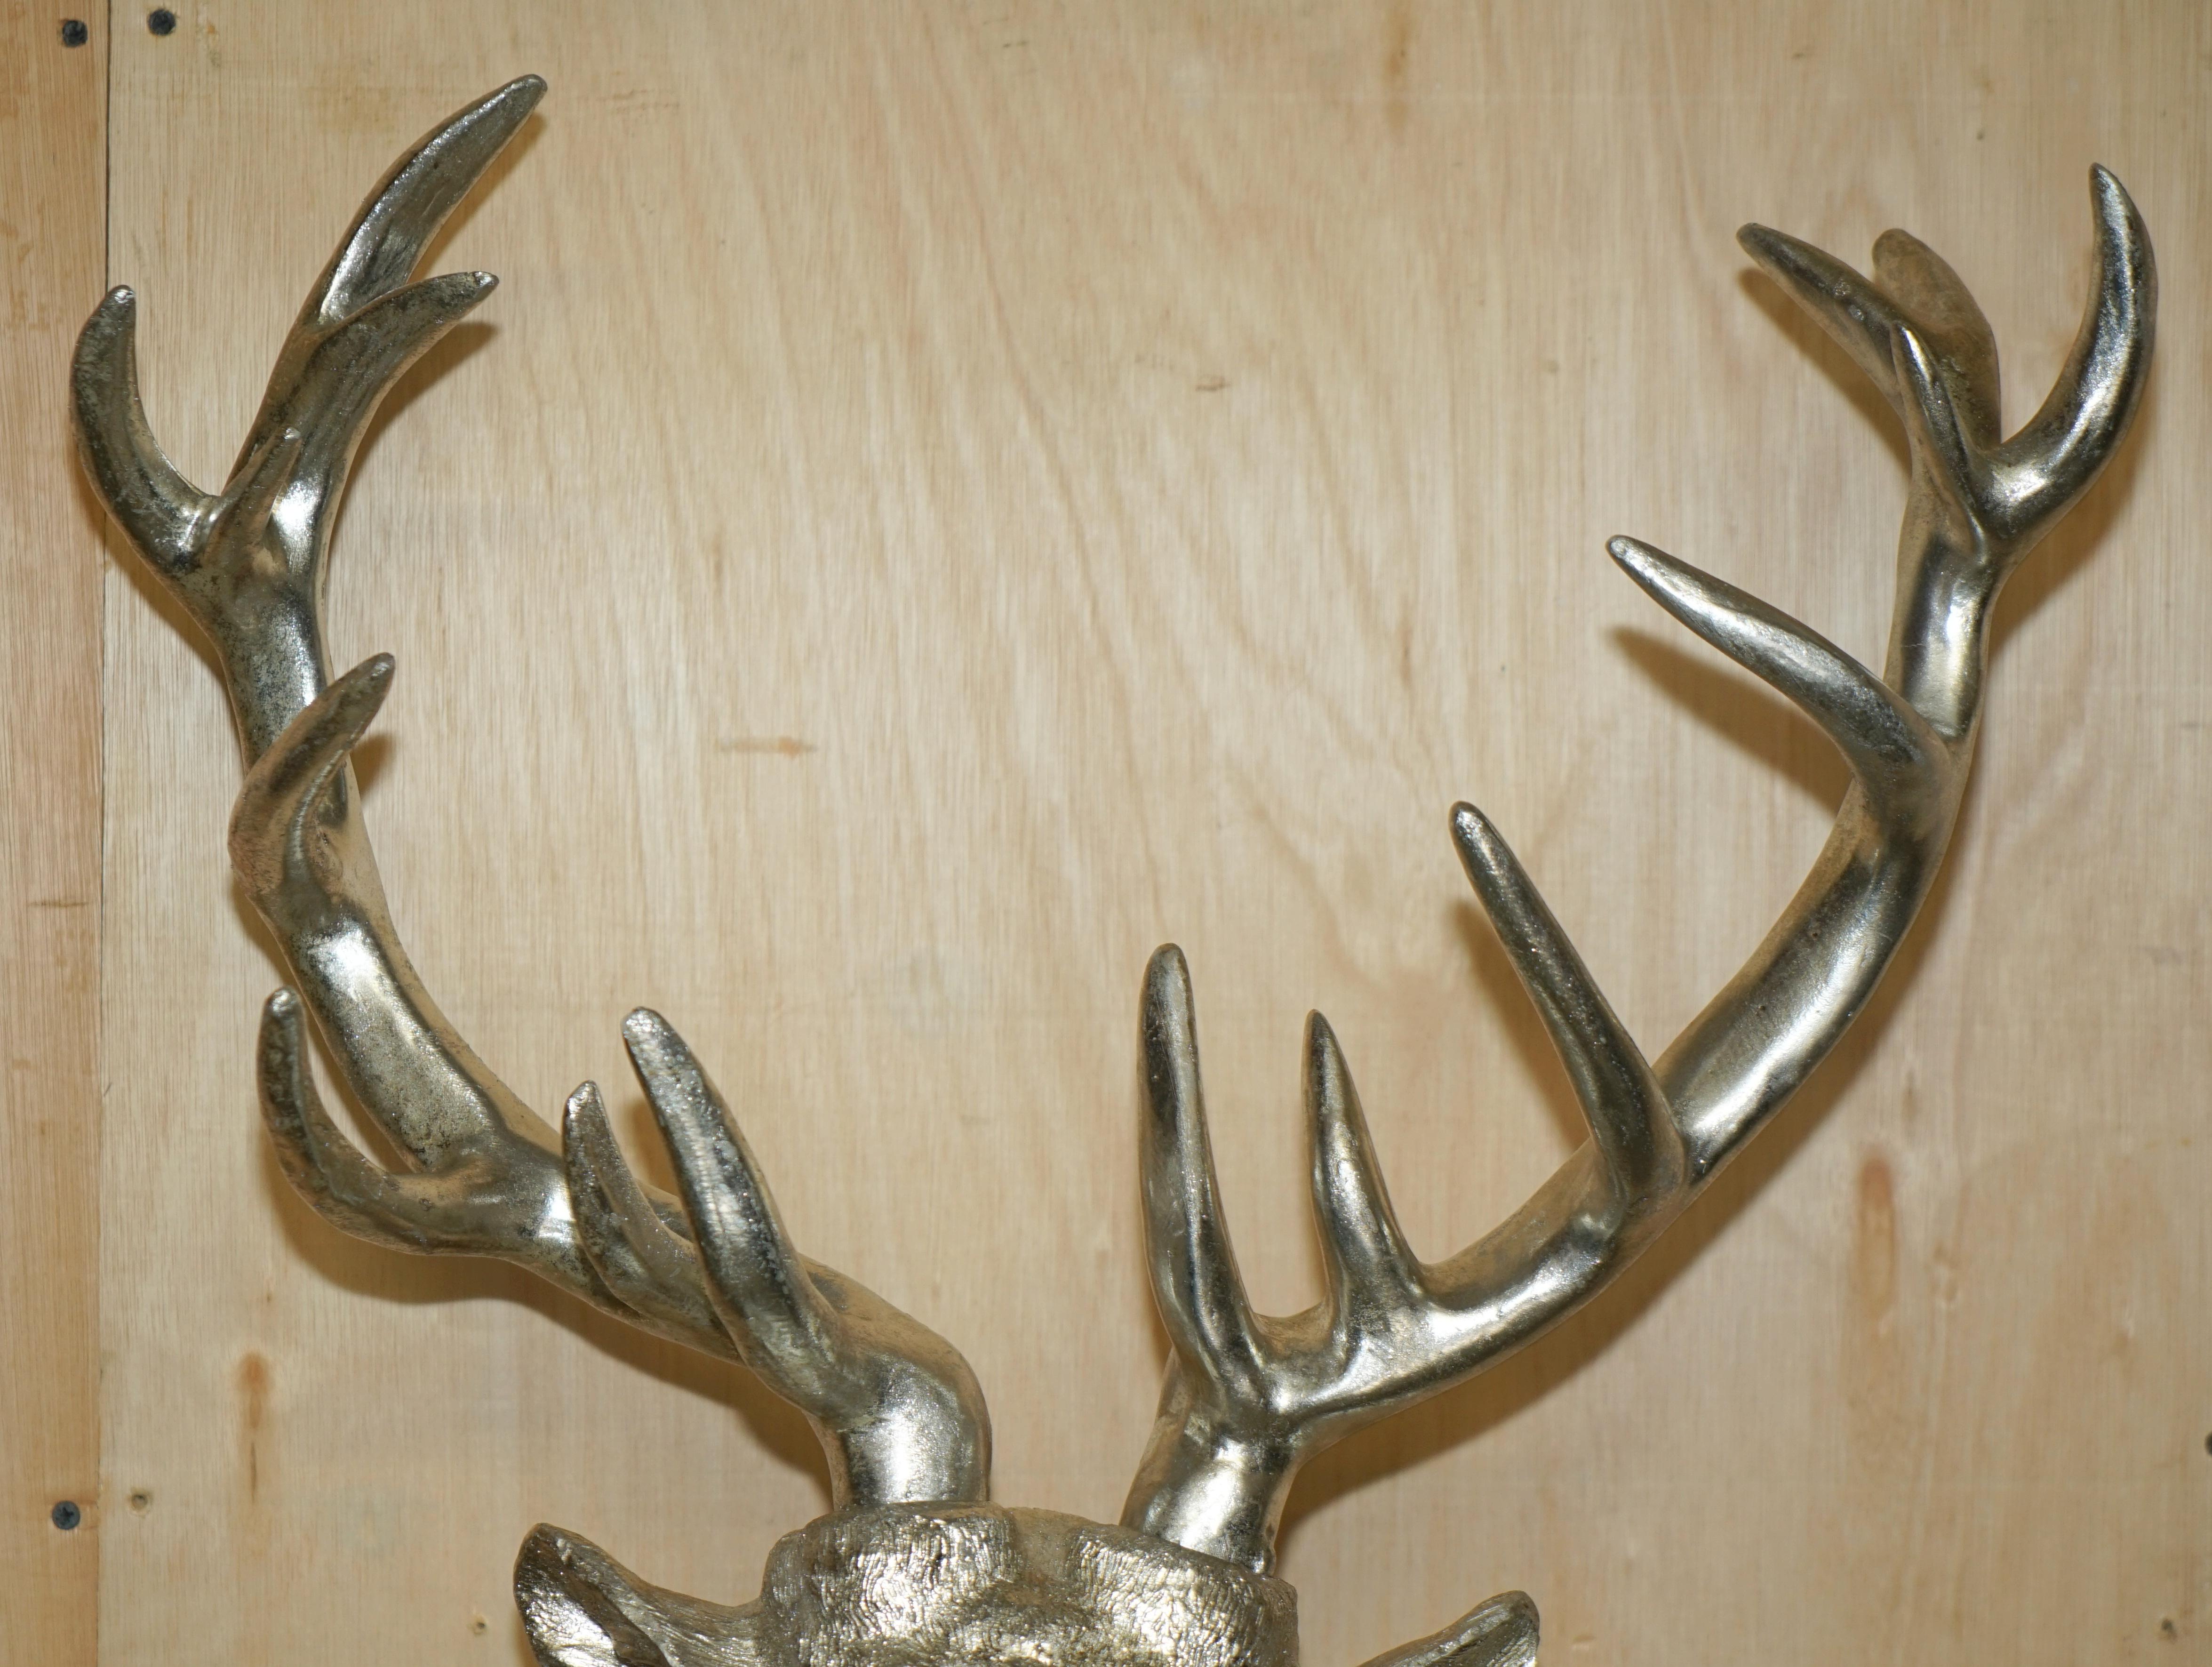 Royal House Antiques

Royal House Antiques is delighted to offer for sale this very decorative silvered Deer Stag's head with removable antlers that is large scaled

Please note the delivery fee listed is just a guide, it covers within the M25 only